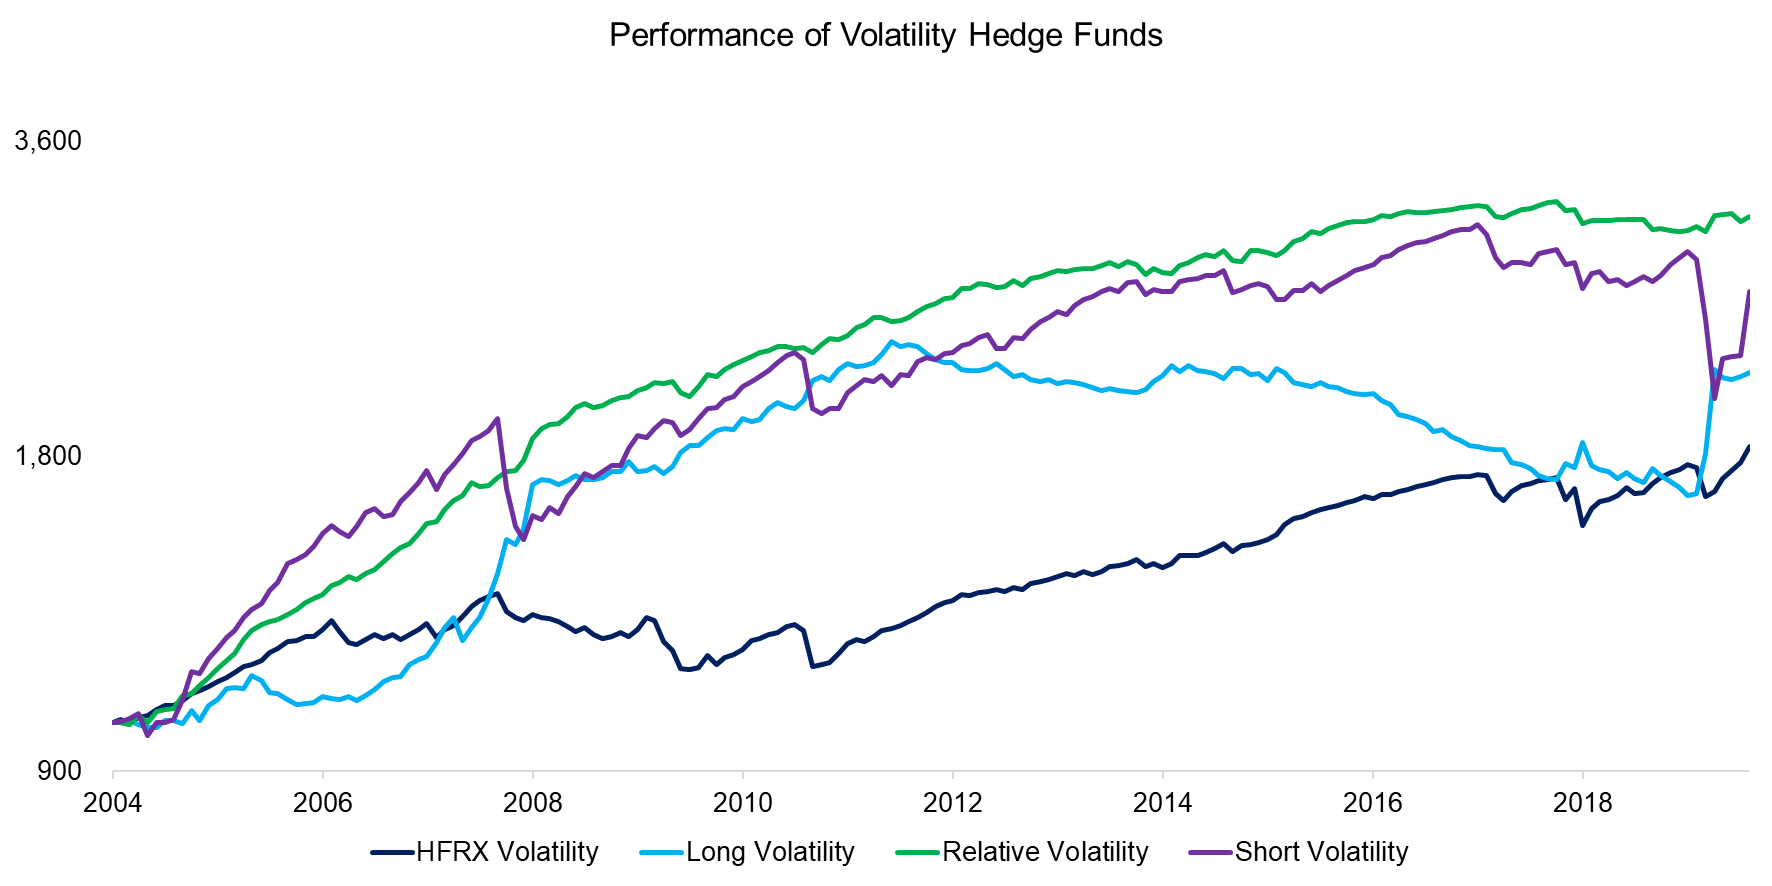 Performance of Volatility Hedge Funds